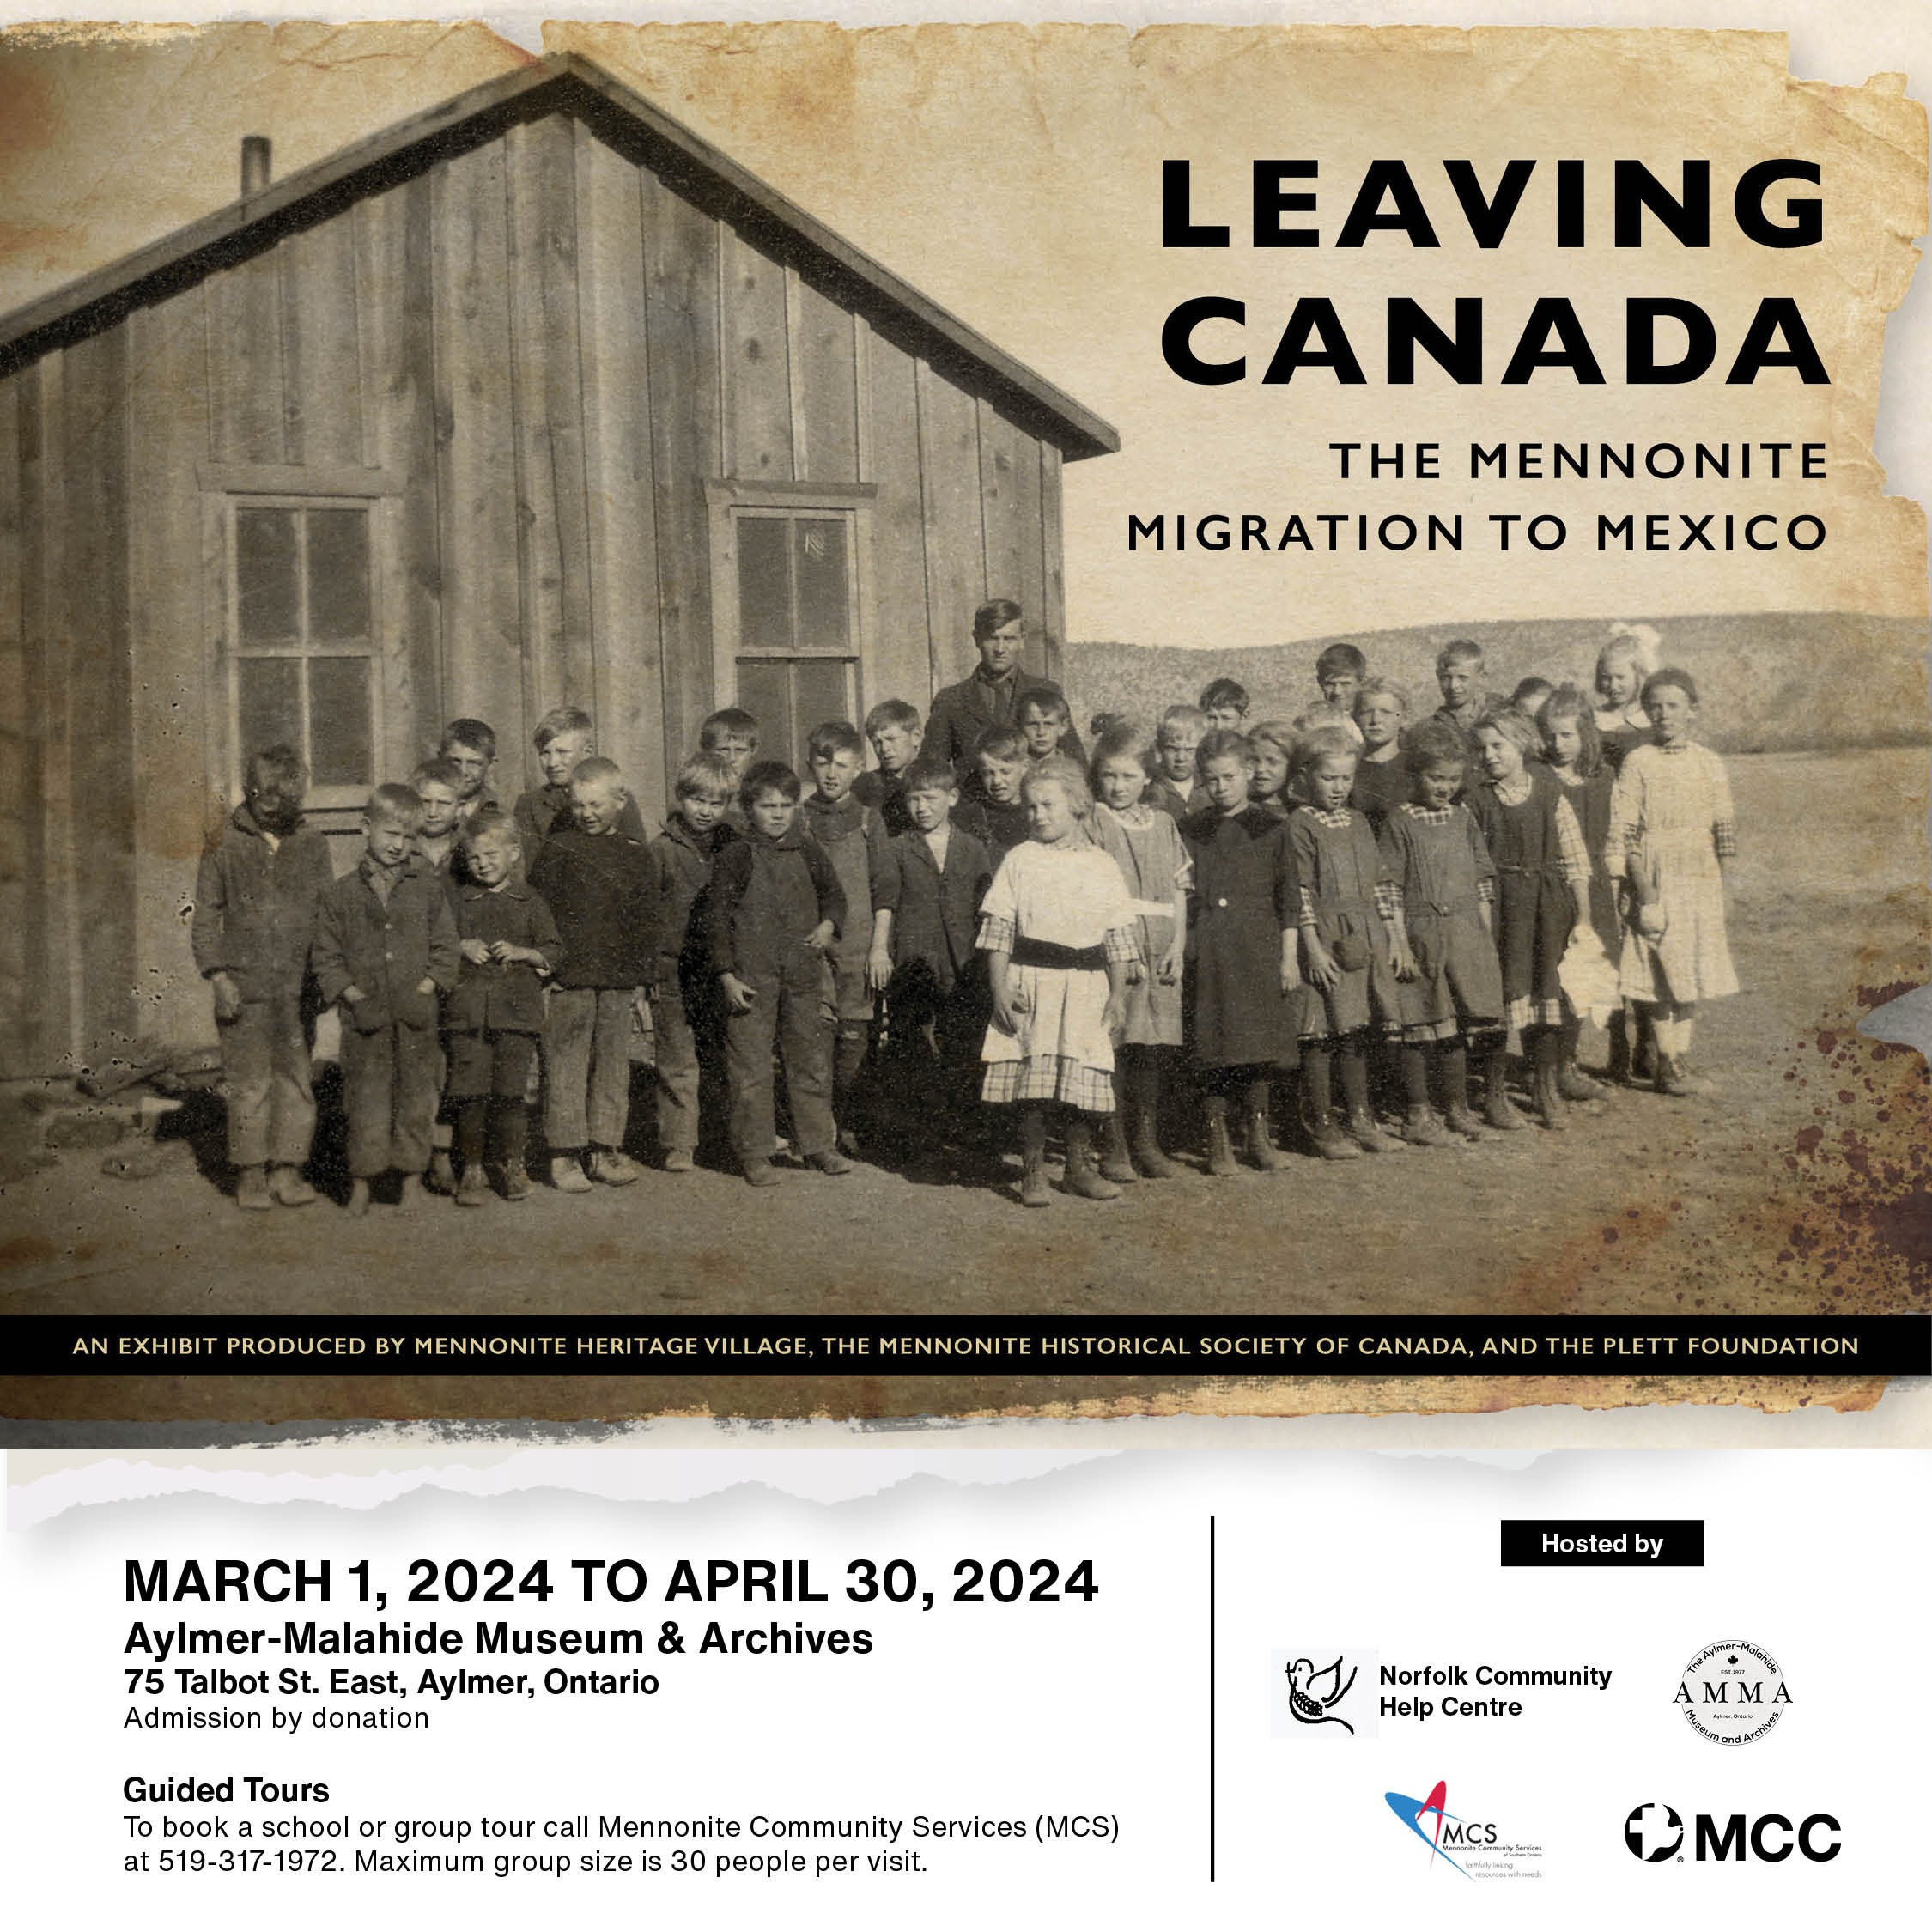 March 1 to April 30, 2024, Aylmer-Malahide Museum & Archives, 75 Talbot St. E., Aylmer, Ontario, Admission by donation. Guided Tours: To book a school group or tour call Mennonite Community Services (MCS) at 519-317-1972. Maximum group size is 30 people per visit.